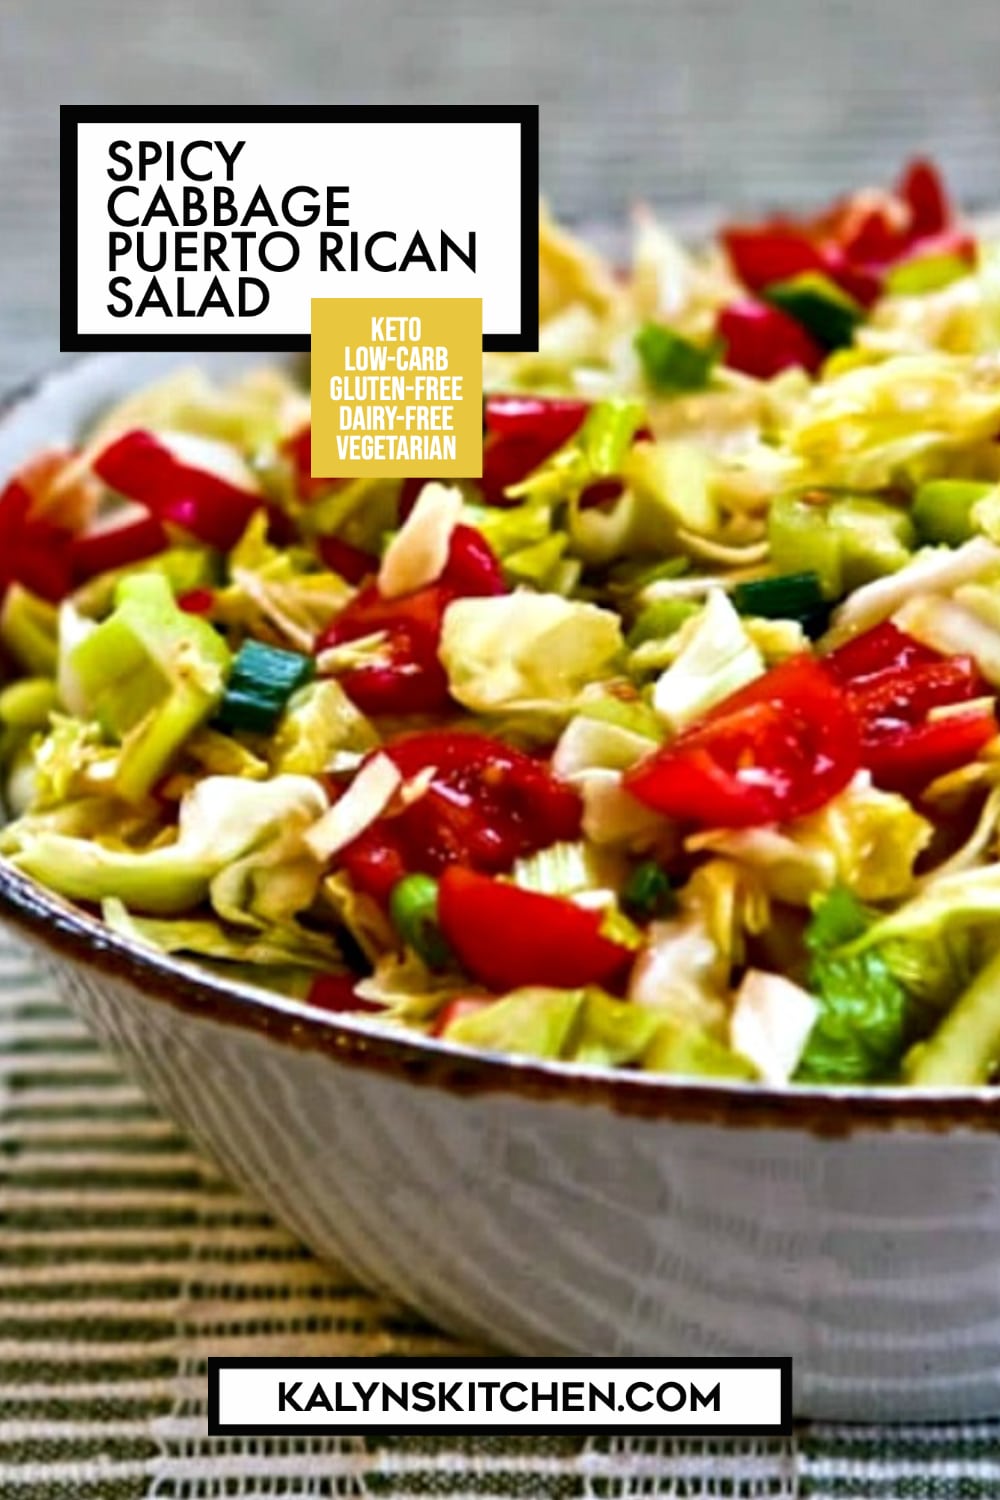 Pinterest image of Spicy Cabbage Puerto Rican Salad